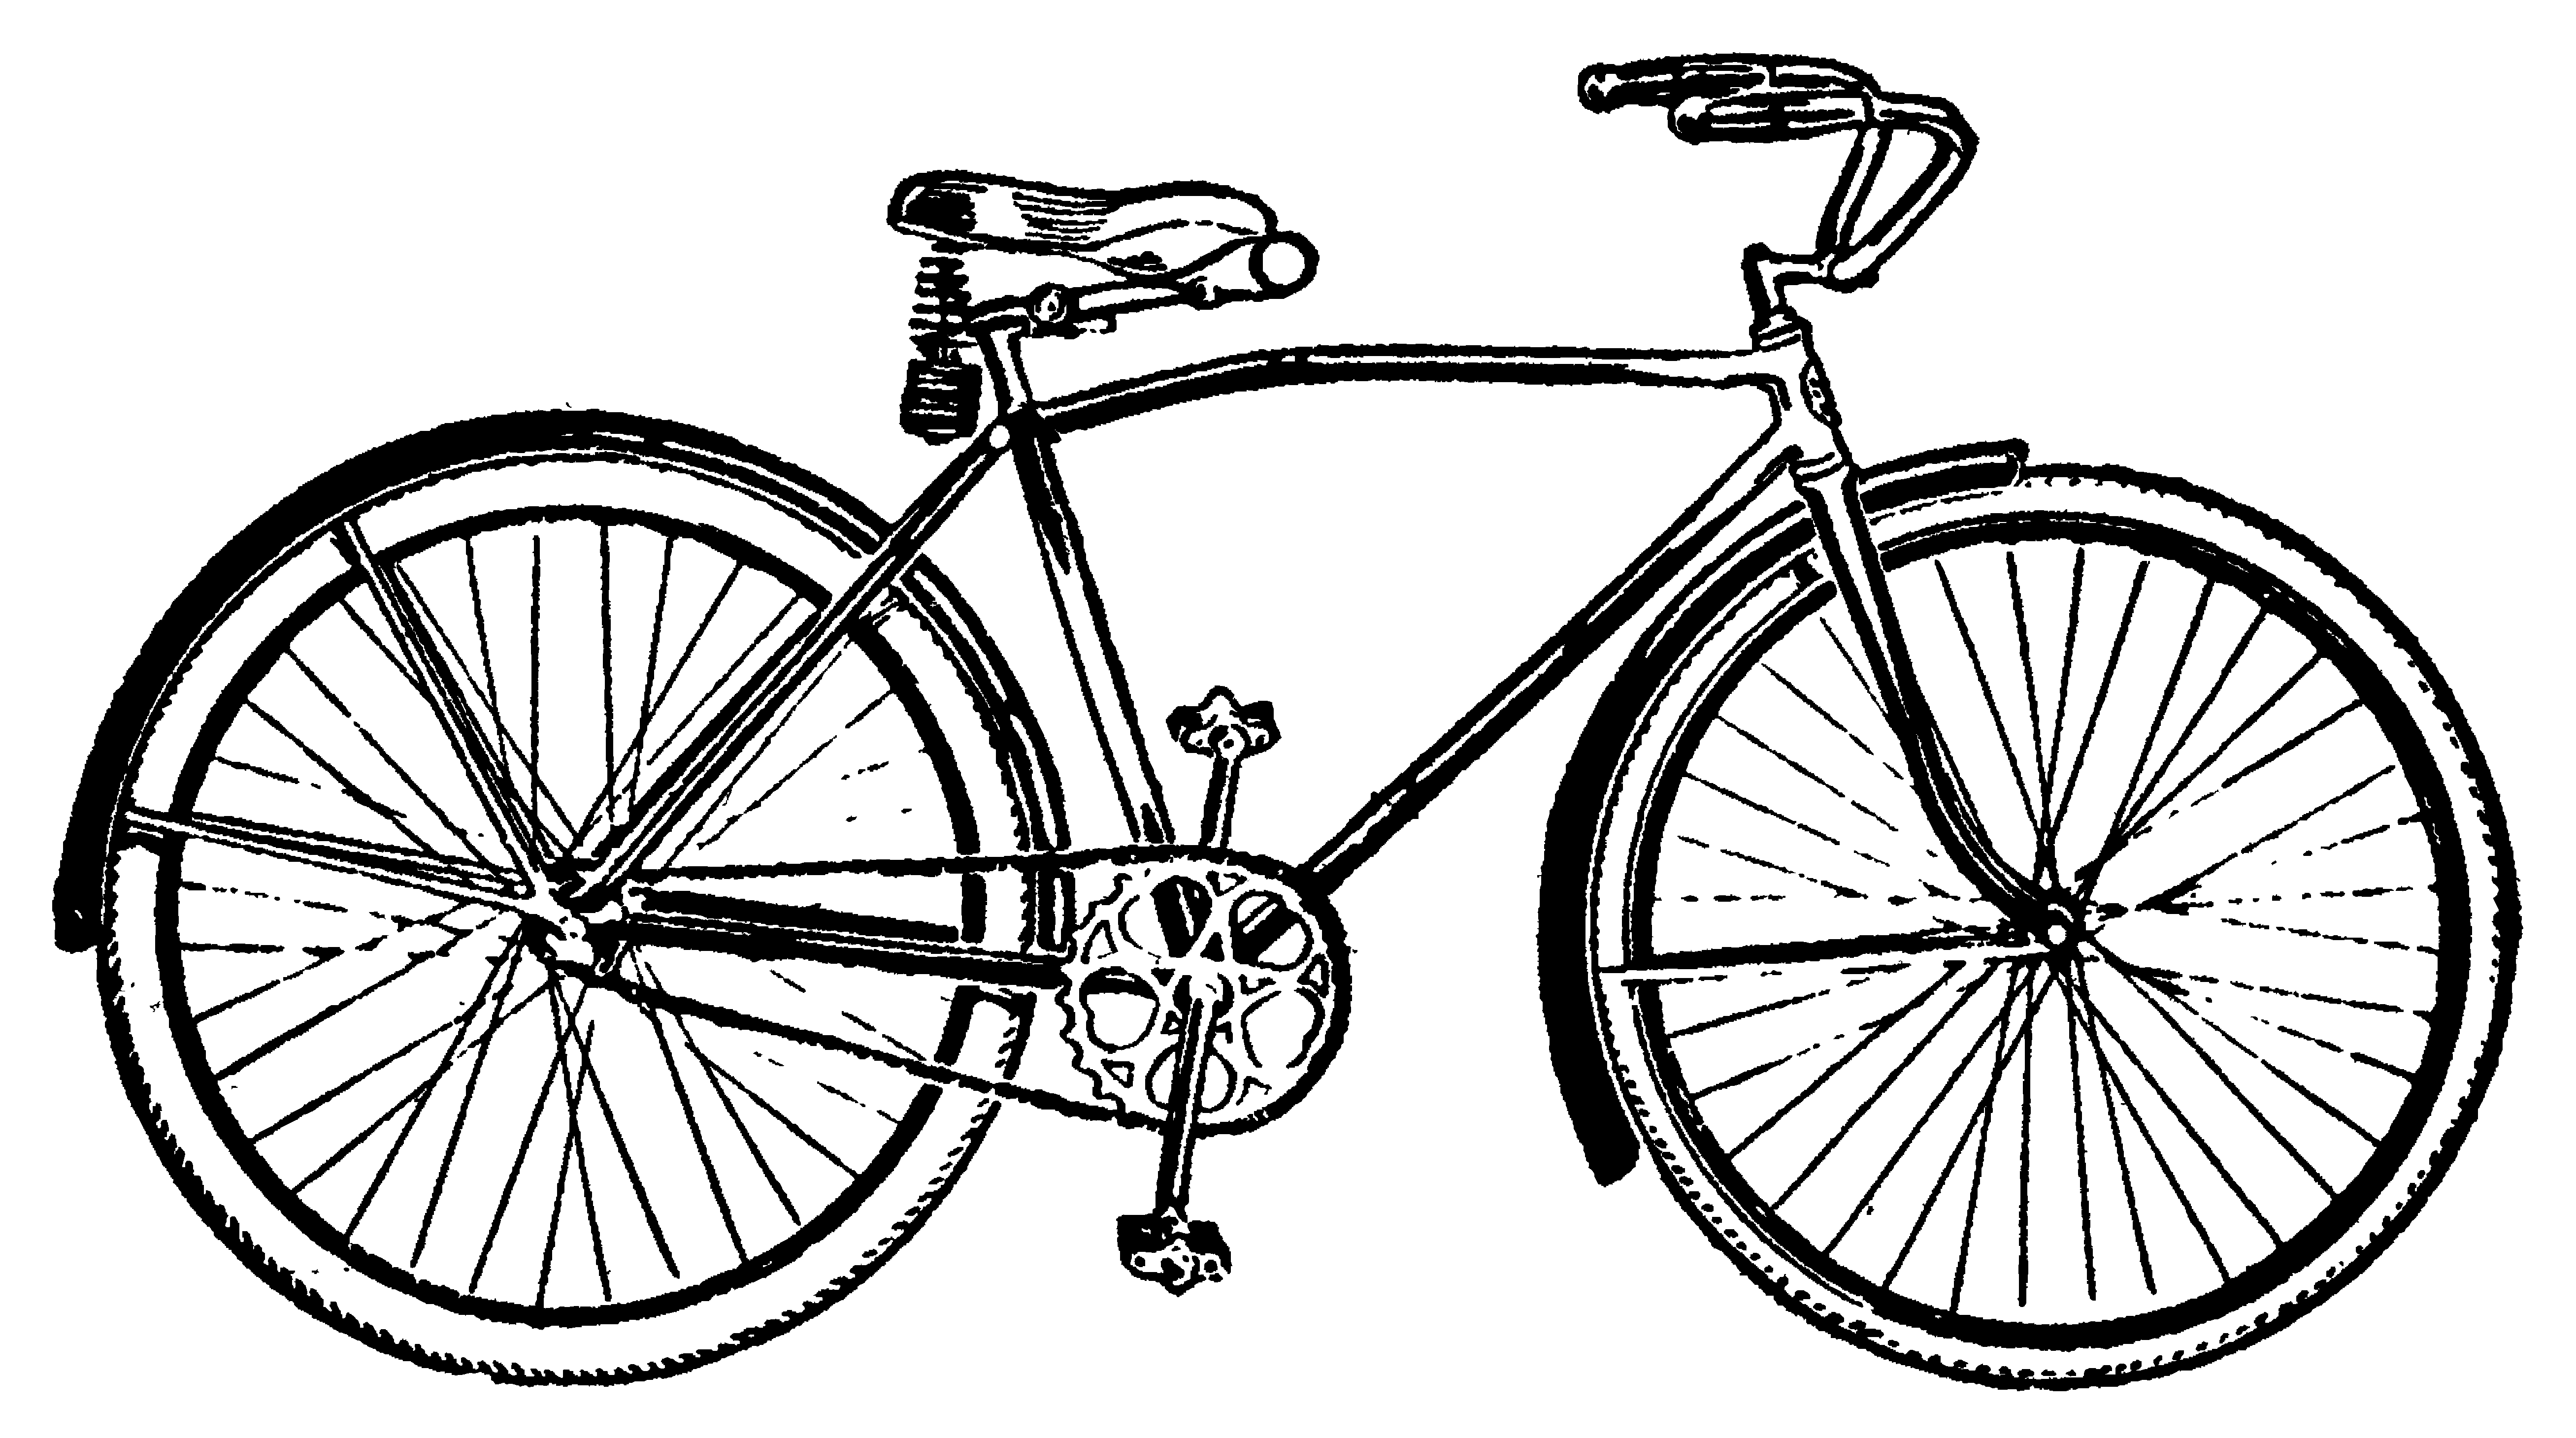 Vintage bicycle clip art. Cycle clipart